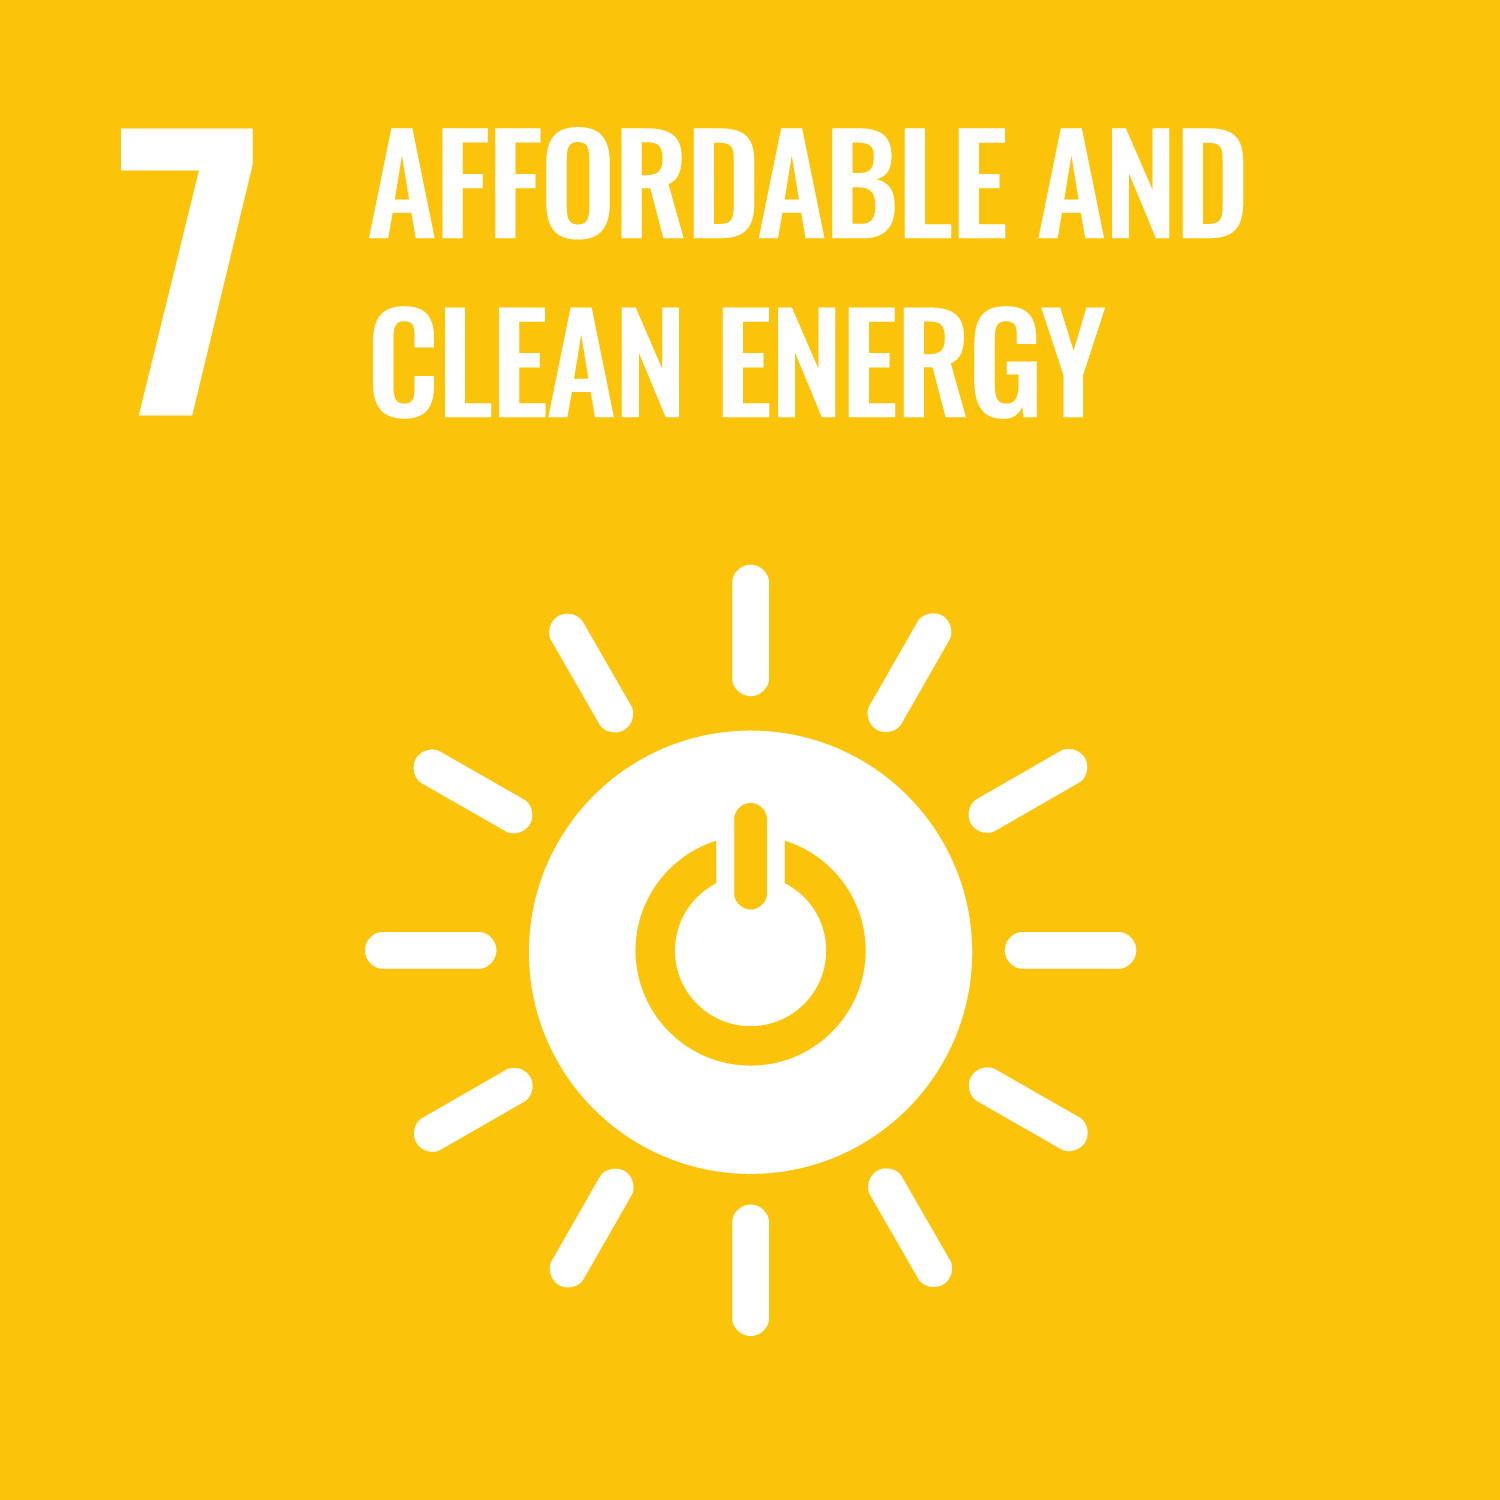 An icon for UN SDG #7 - Affordable and Clean Energy. It depicts a drawing of a sun with a power button in the middle against a yellow background.